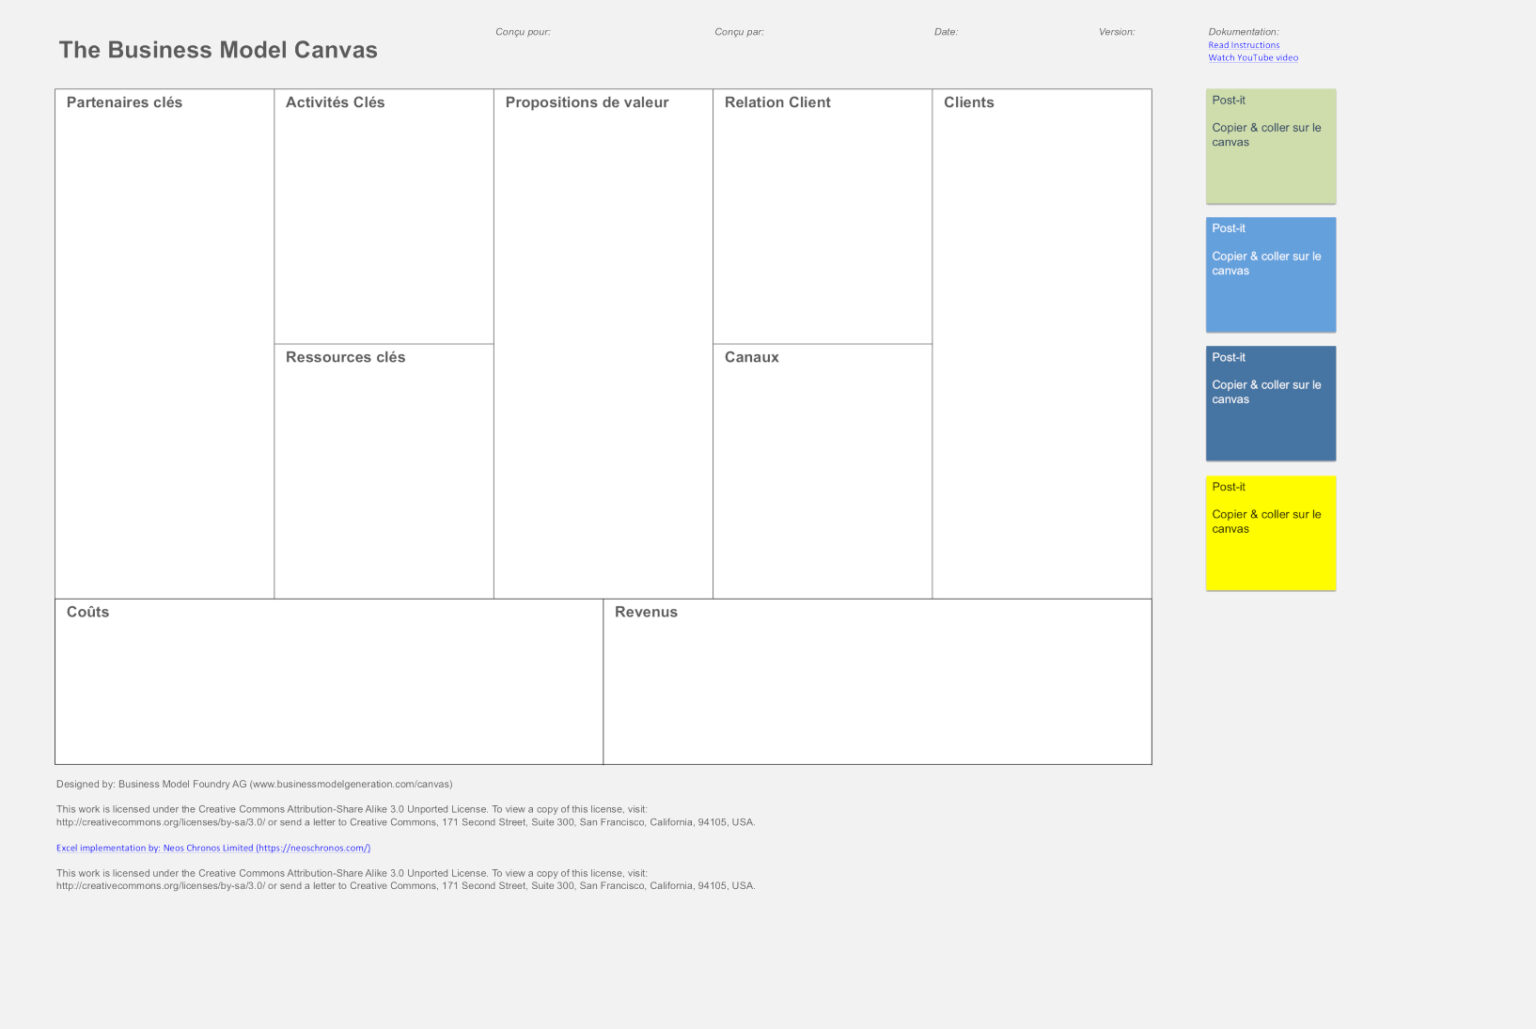 014-business-model-canvas-template-word-doc-neos-chronos-for-business